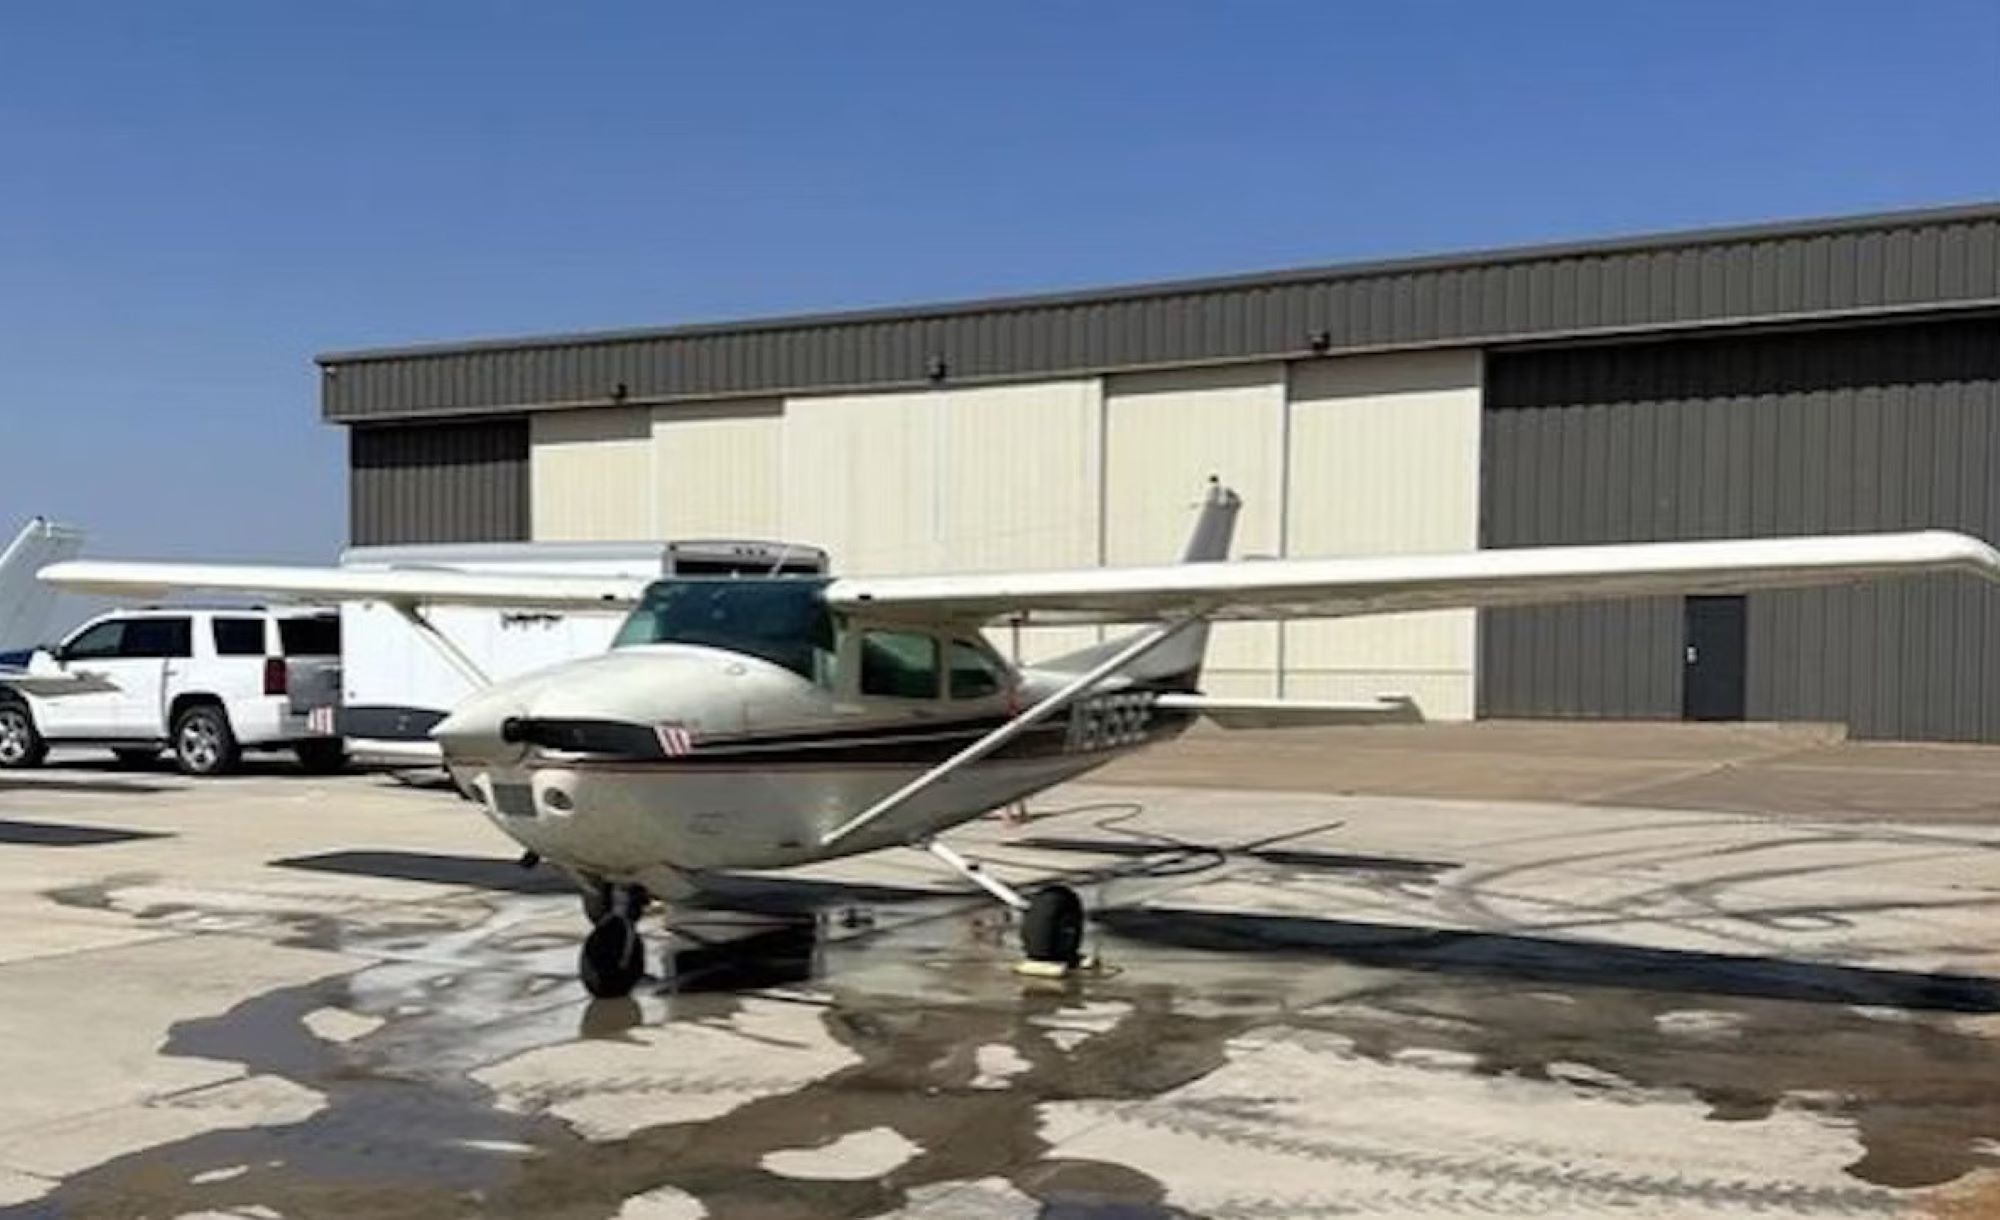 The Cessna 182 Skylane Makes for a Solid Aircraft Top Pick